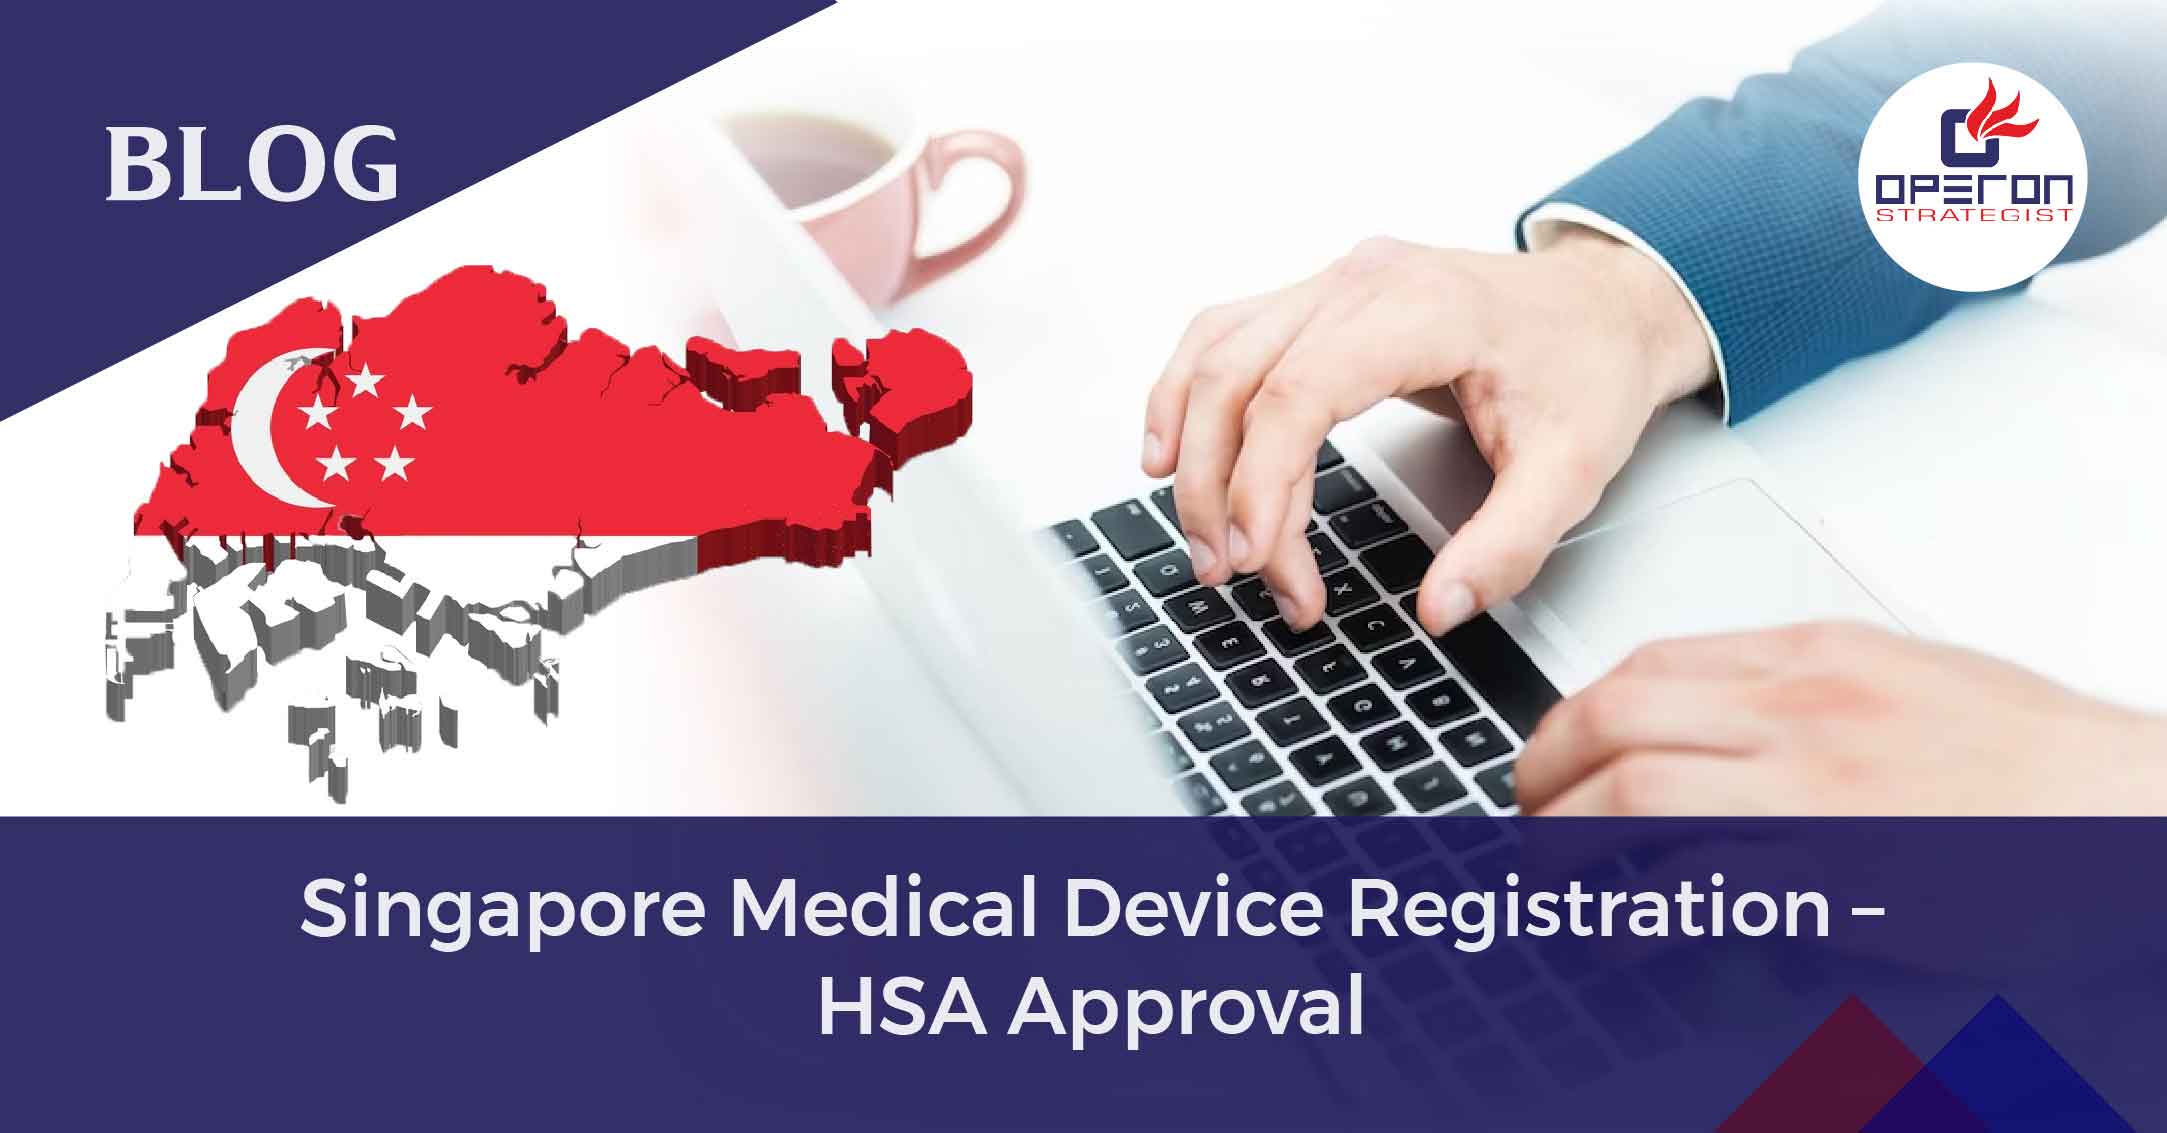 Crucial Steps for Singapore Medical Device Registration & HSA Approval